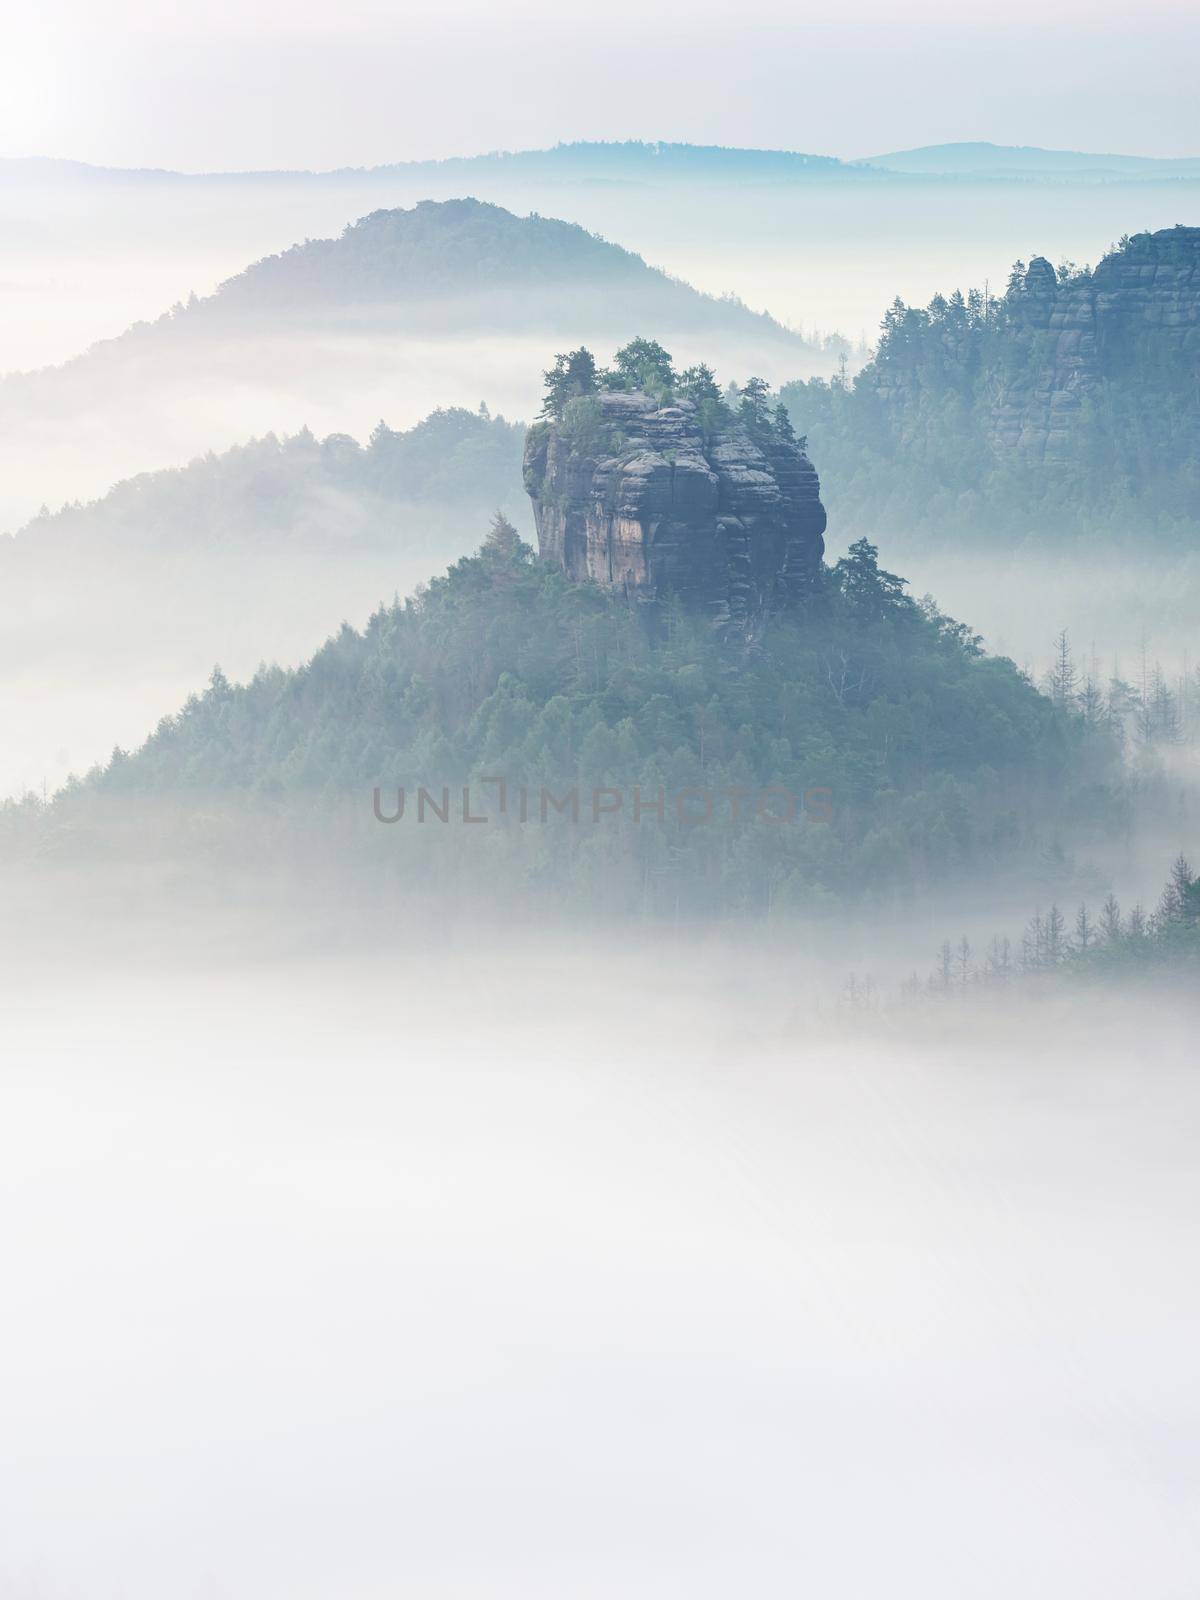 The fabulous Winterstein, also called Hinteres Raubschloss or Raubstein. It is a sandstone rock massif, the butte in the Saxon Switzerland National Park in the Bad Schandau region, Germany